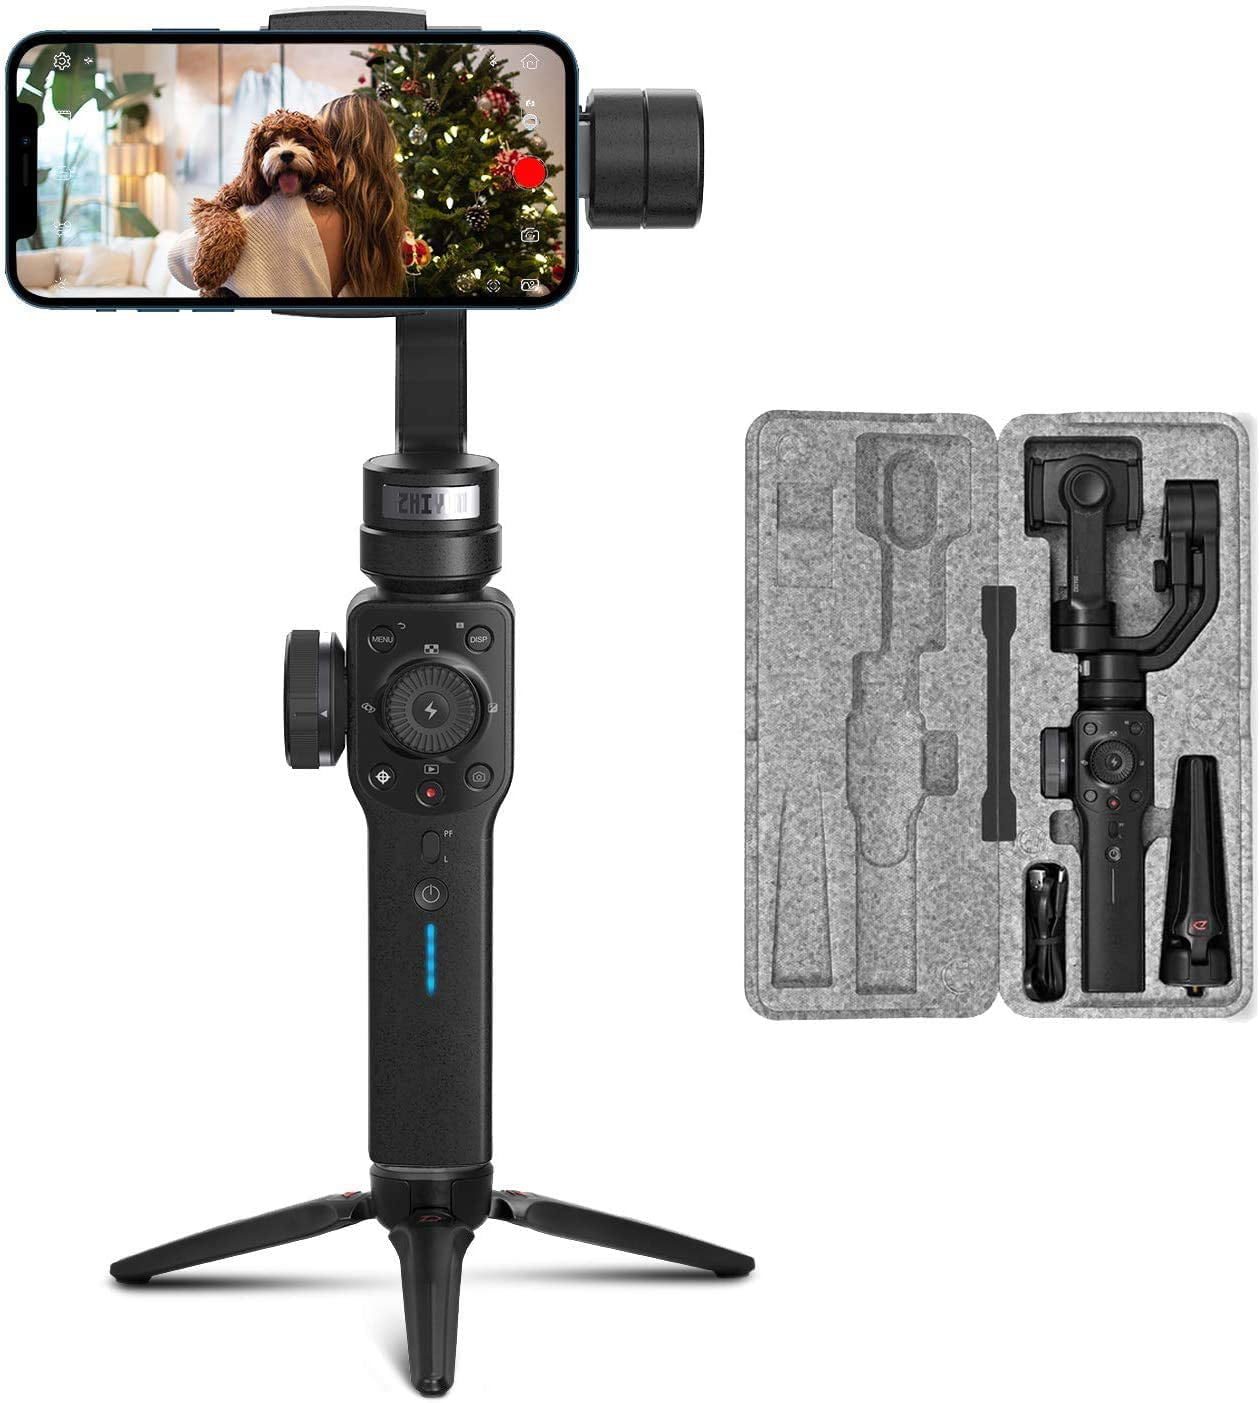 Tiktok Portable Stabilizer for Vlogging YouTube Live Video Compatible with iPhone and Android Handheld 3-Axis Phone Gimbal Zhiyun Smooth 5 Combo Gimbal Stabilizer for Smartphone 